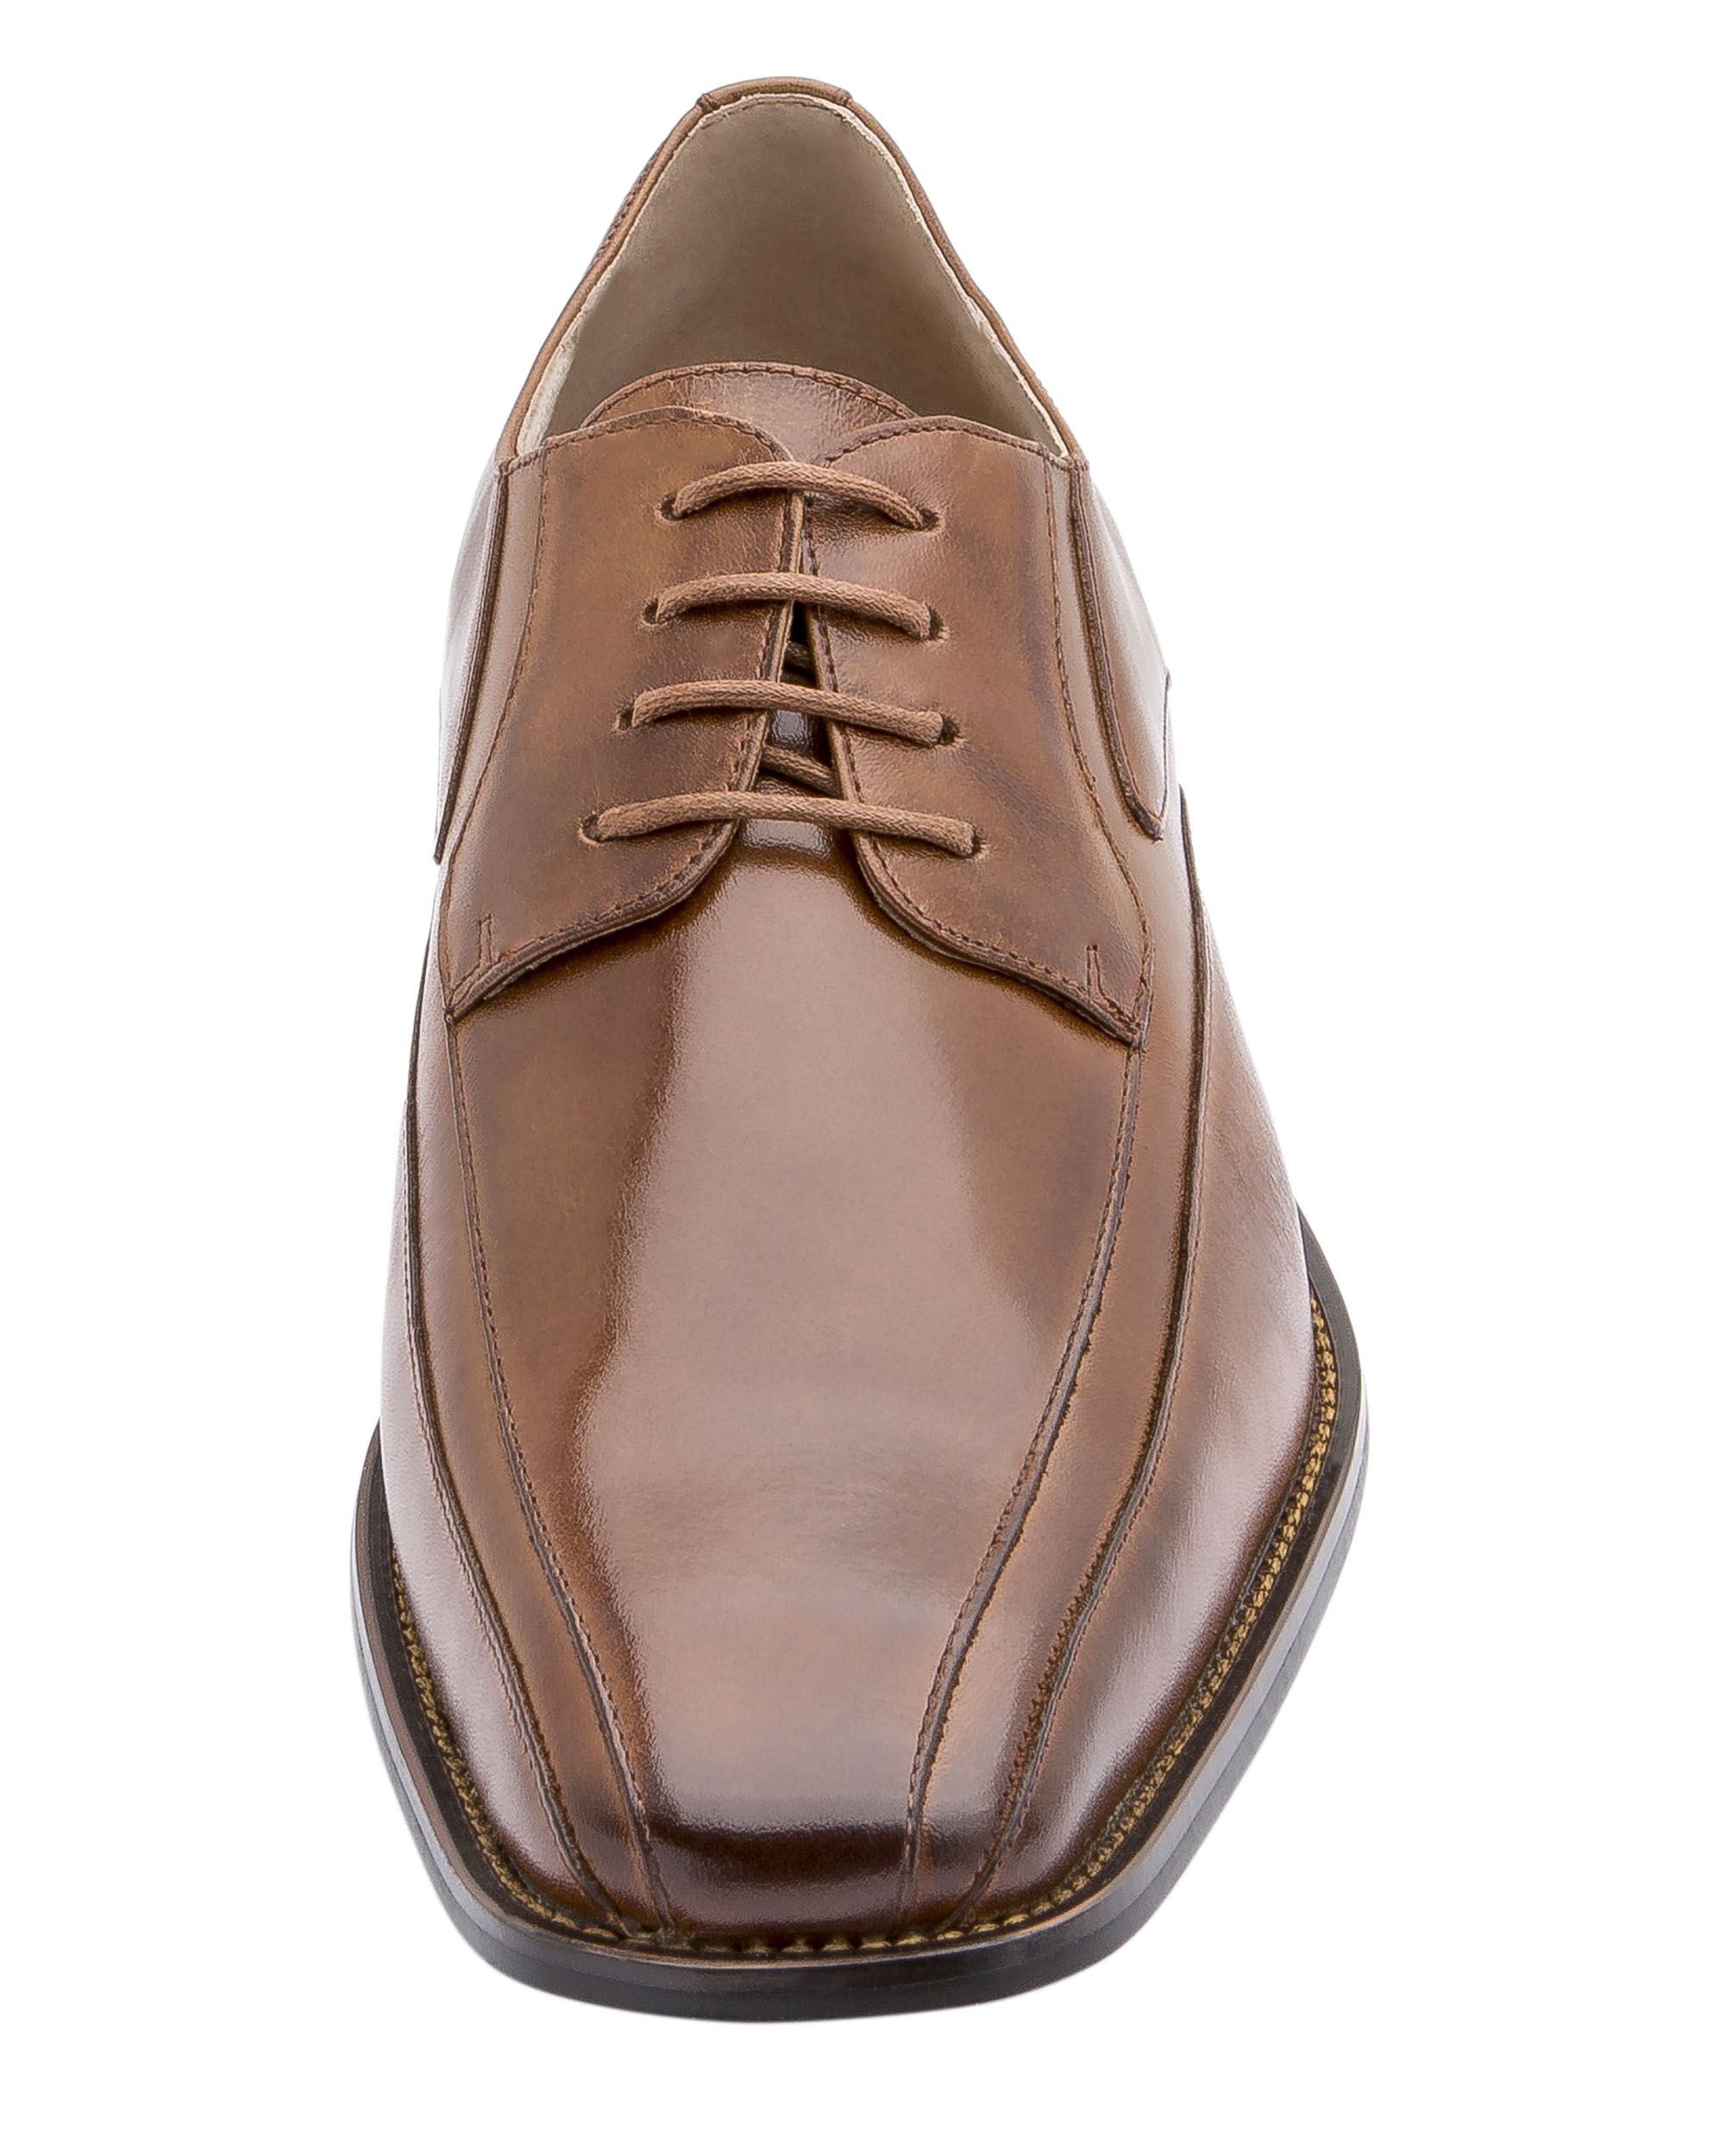 Stacy Adams Men's Barstow Oxford Cognac Leather Shoes 24982-221 